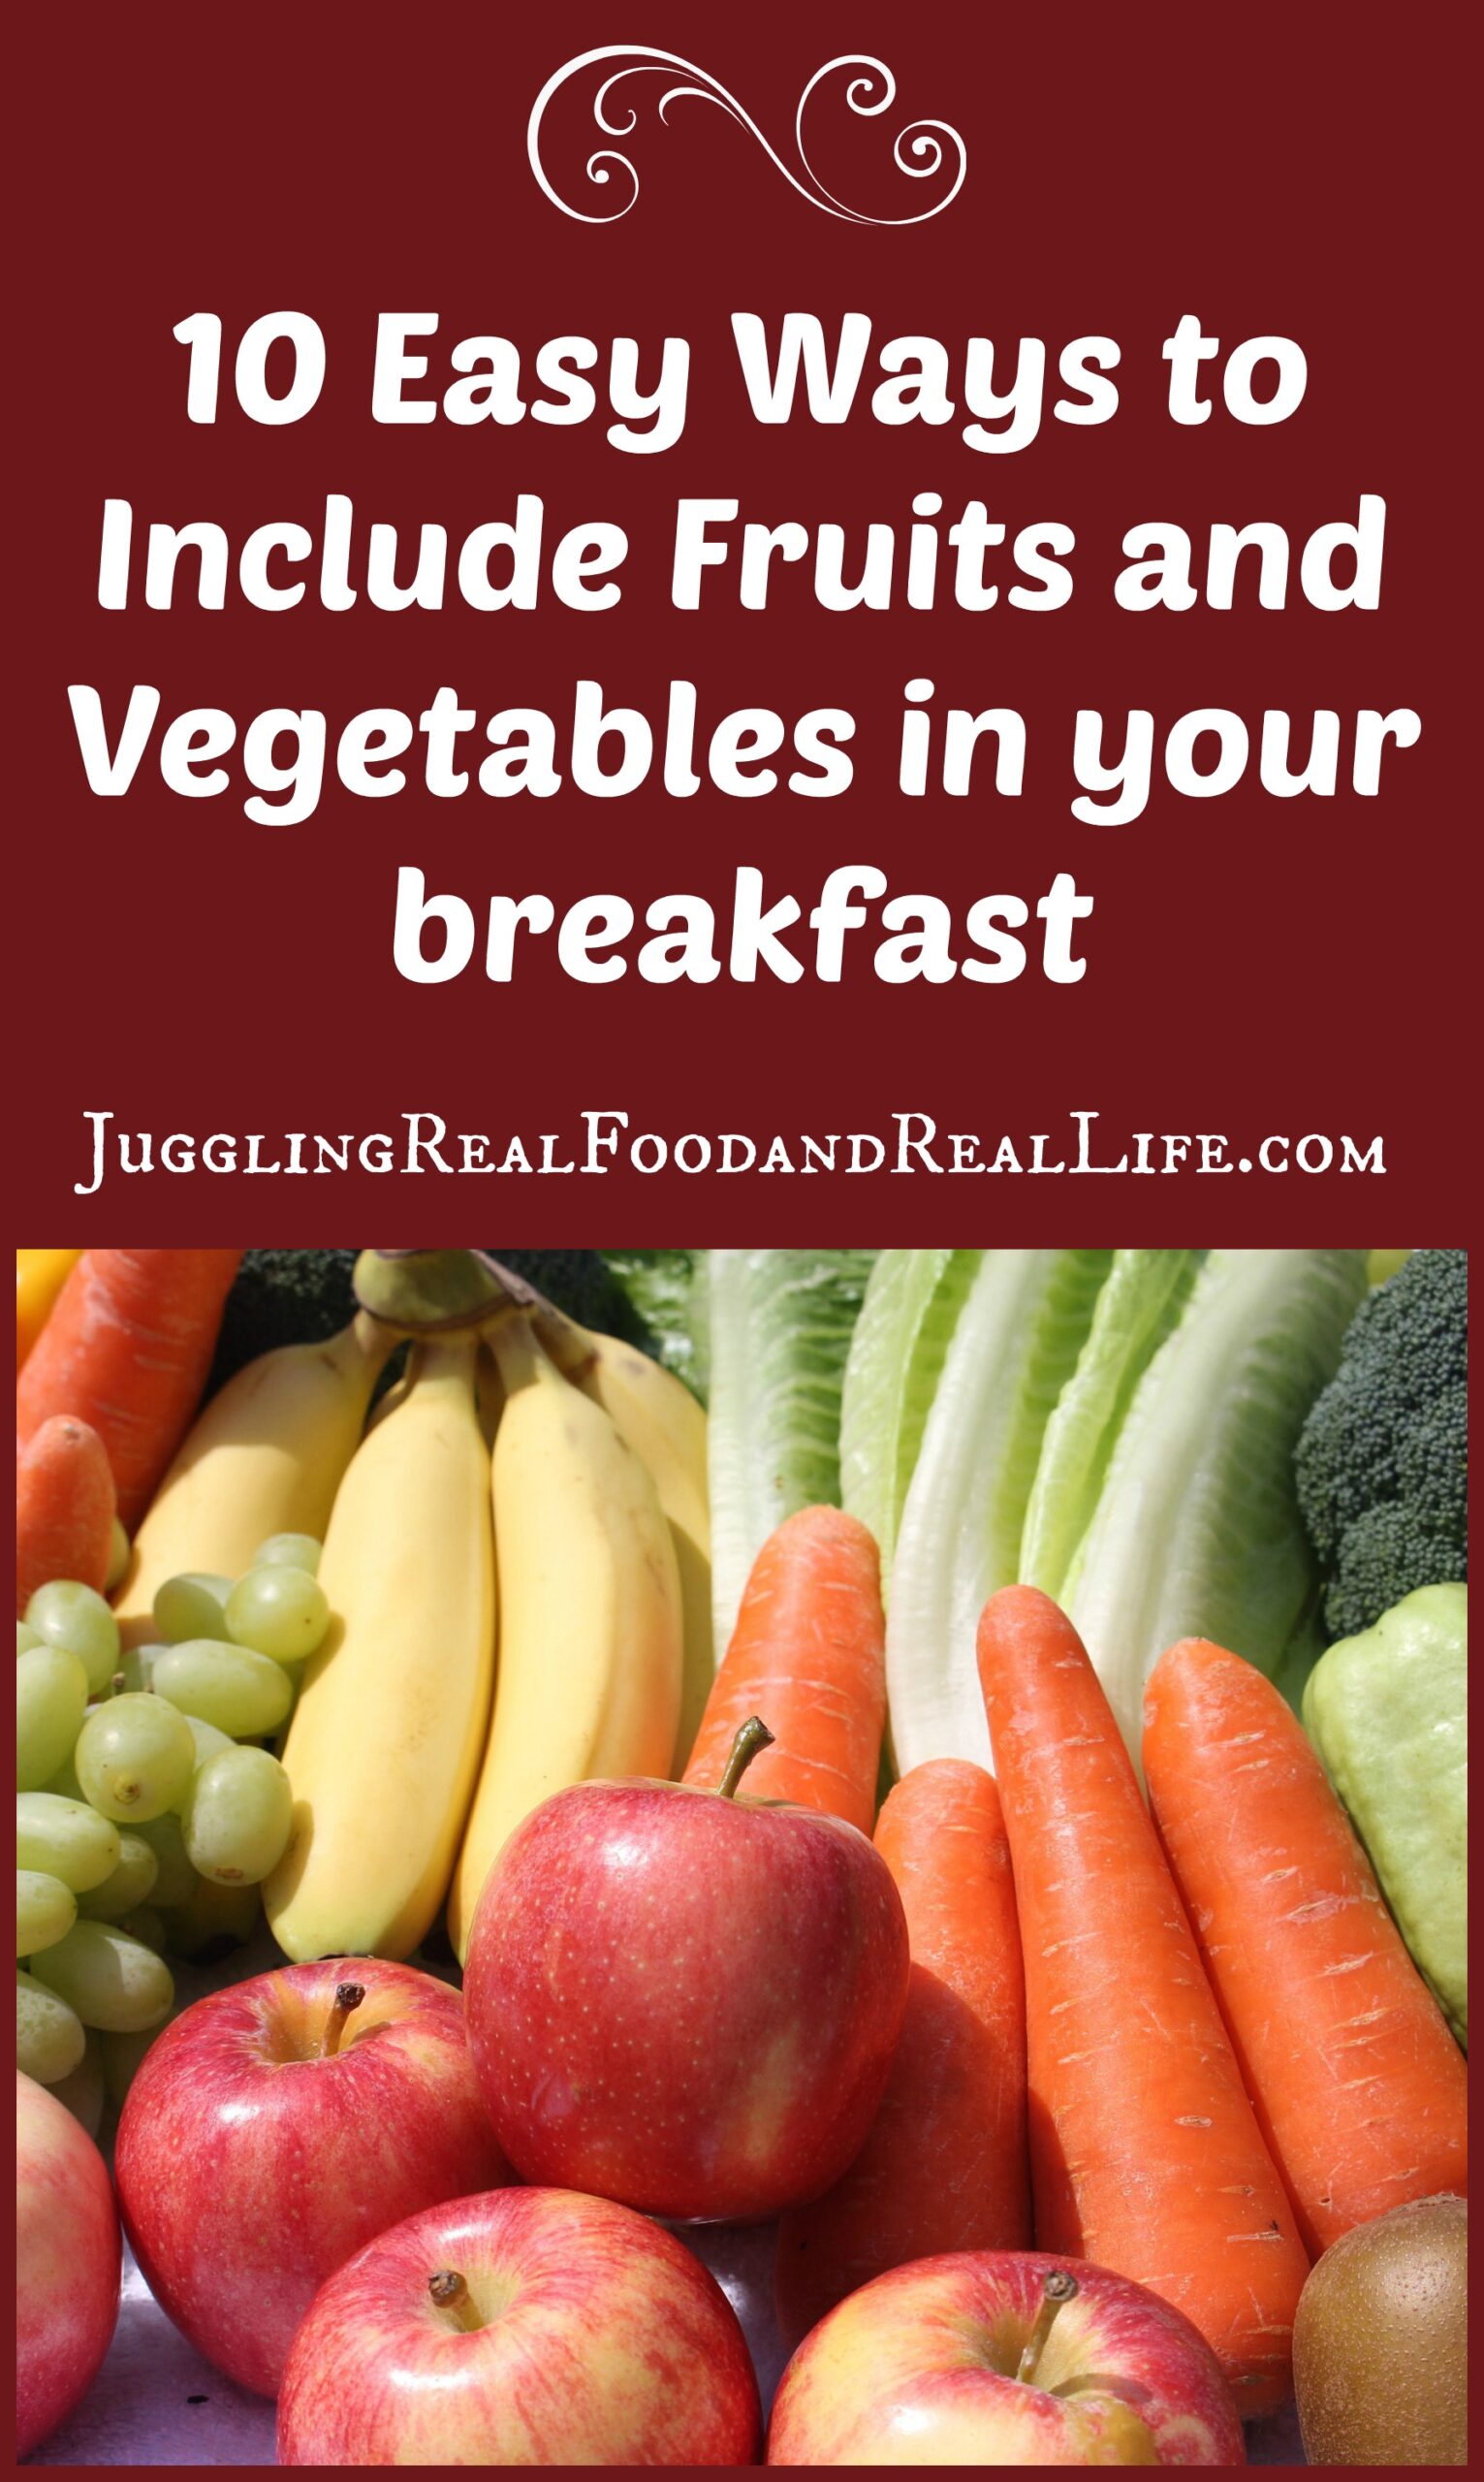 Fruit and vegetable breakfasts